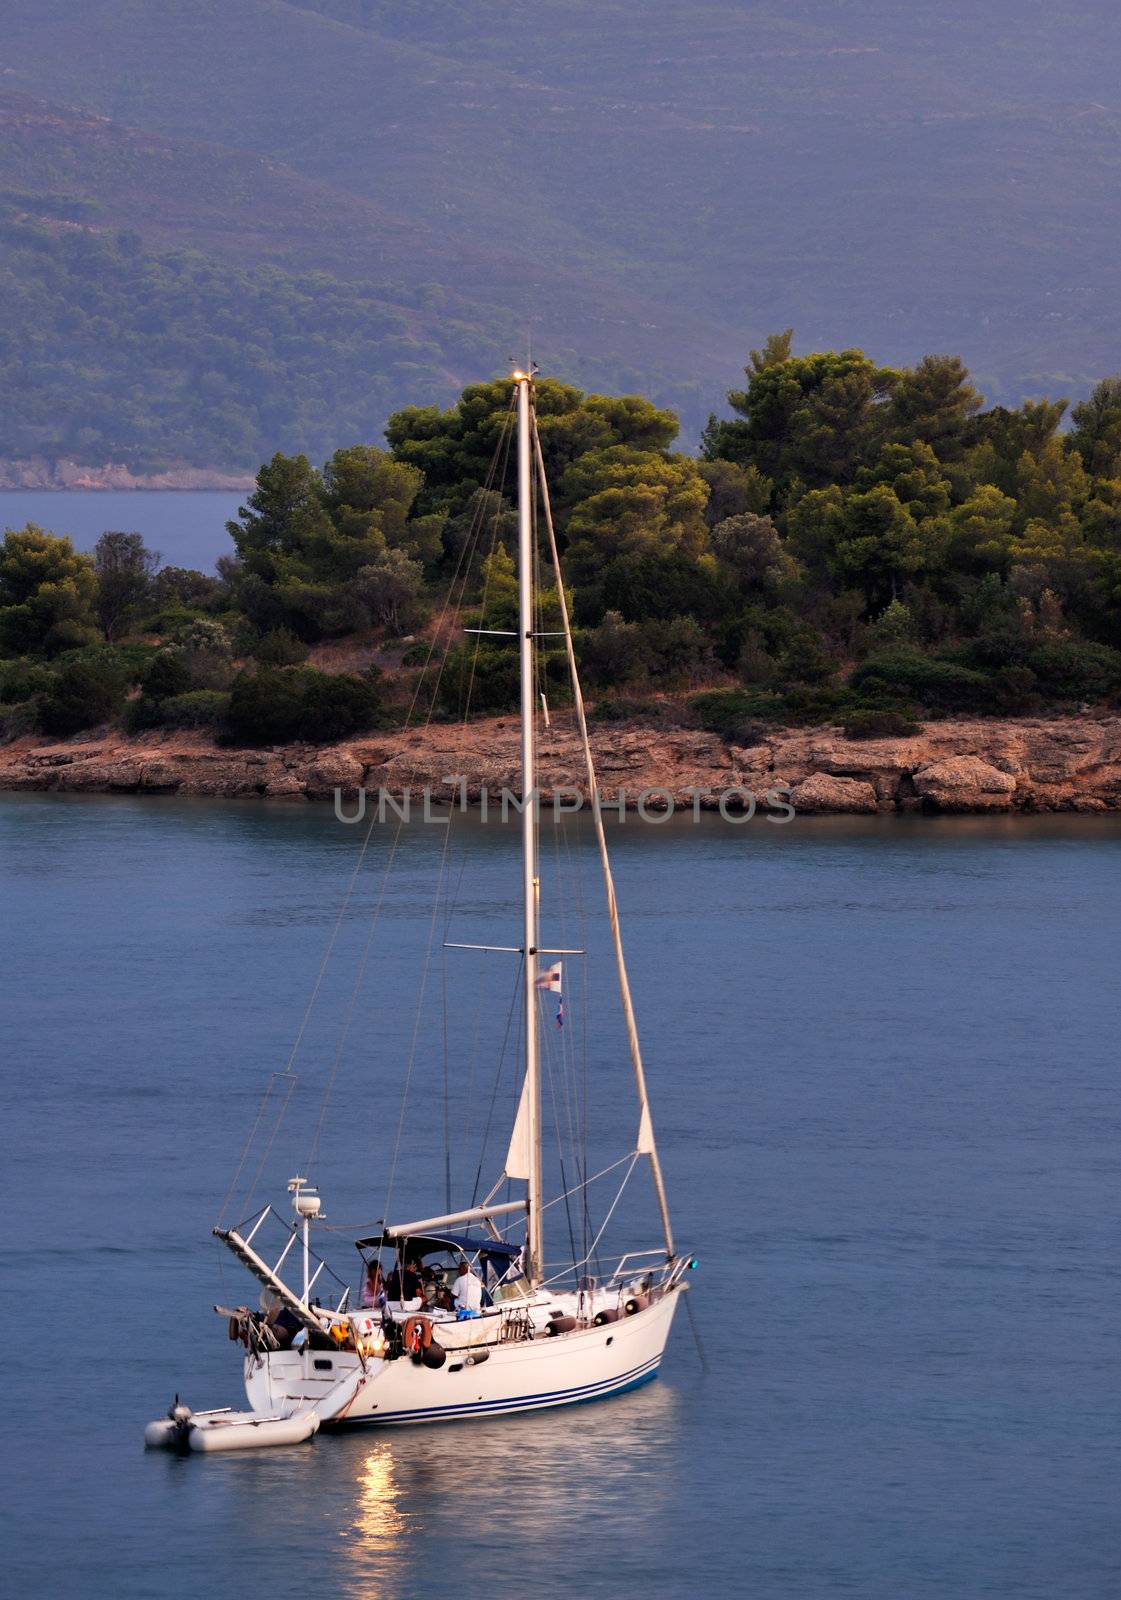 Sailing boat at dusk, anchored in a serene location in the Mediterranean